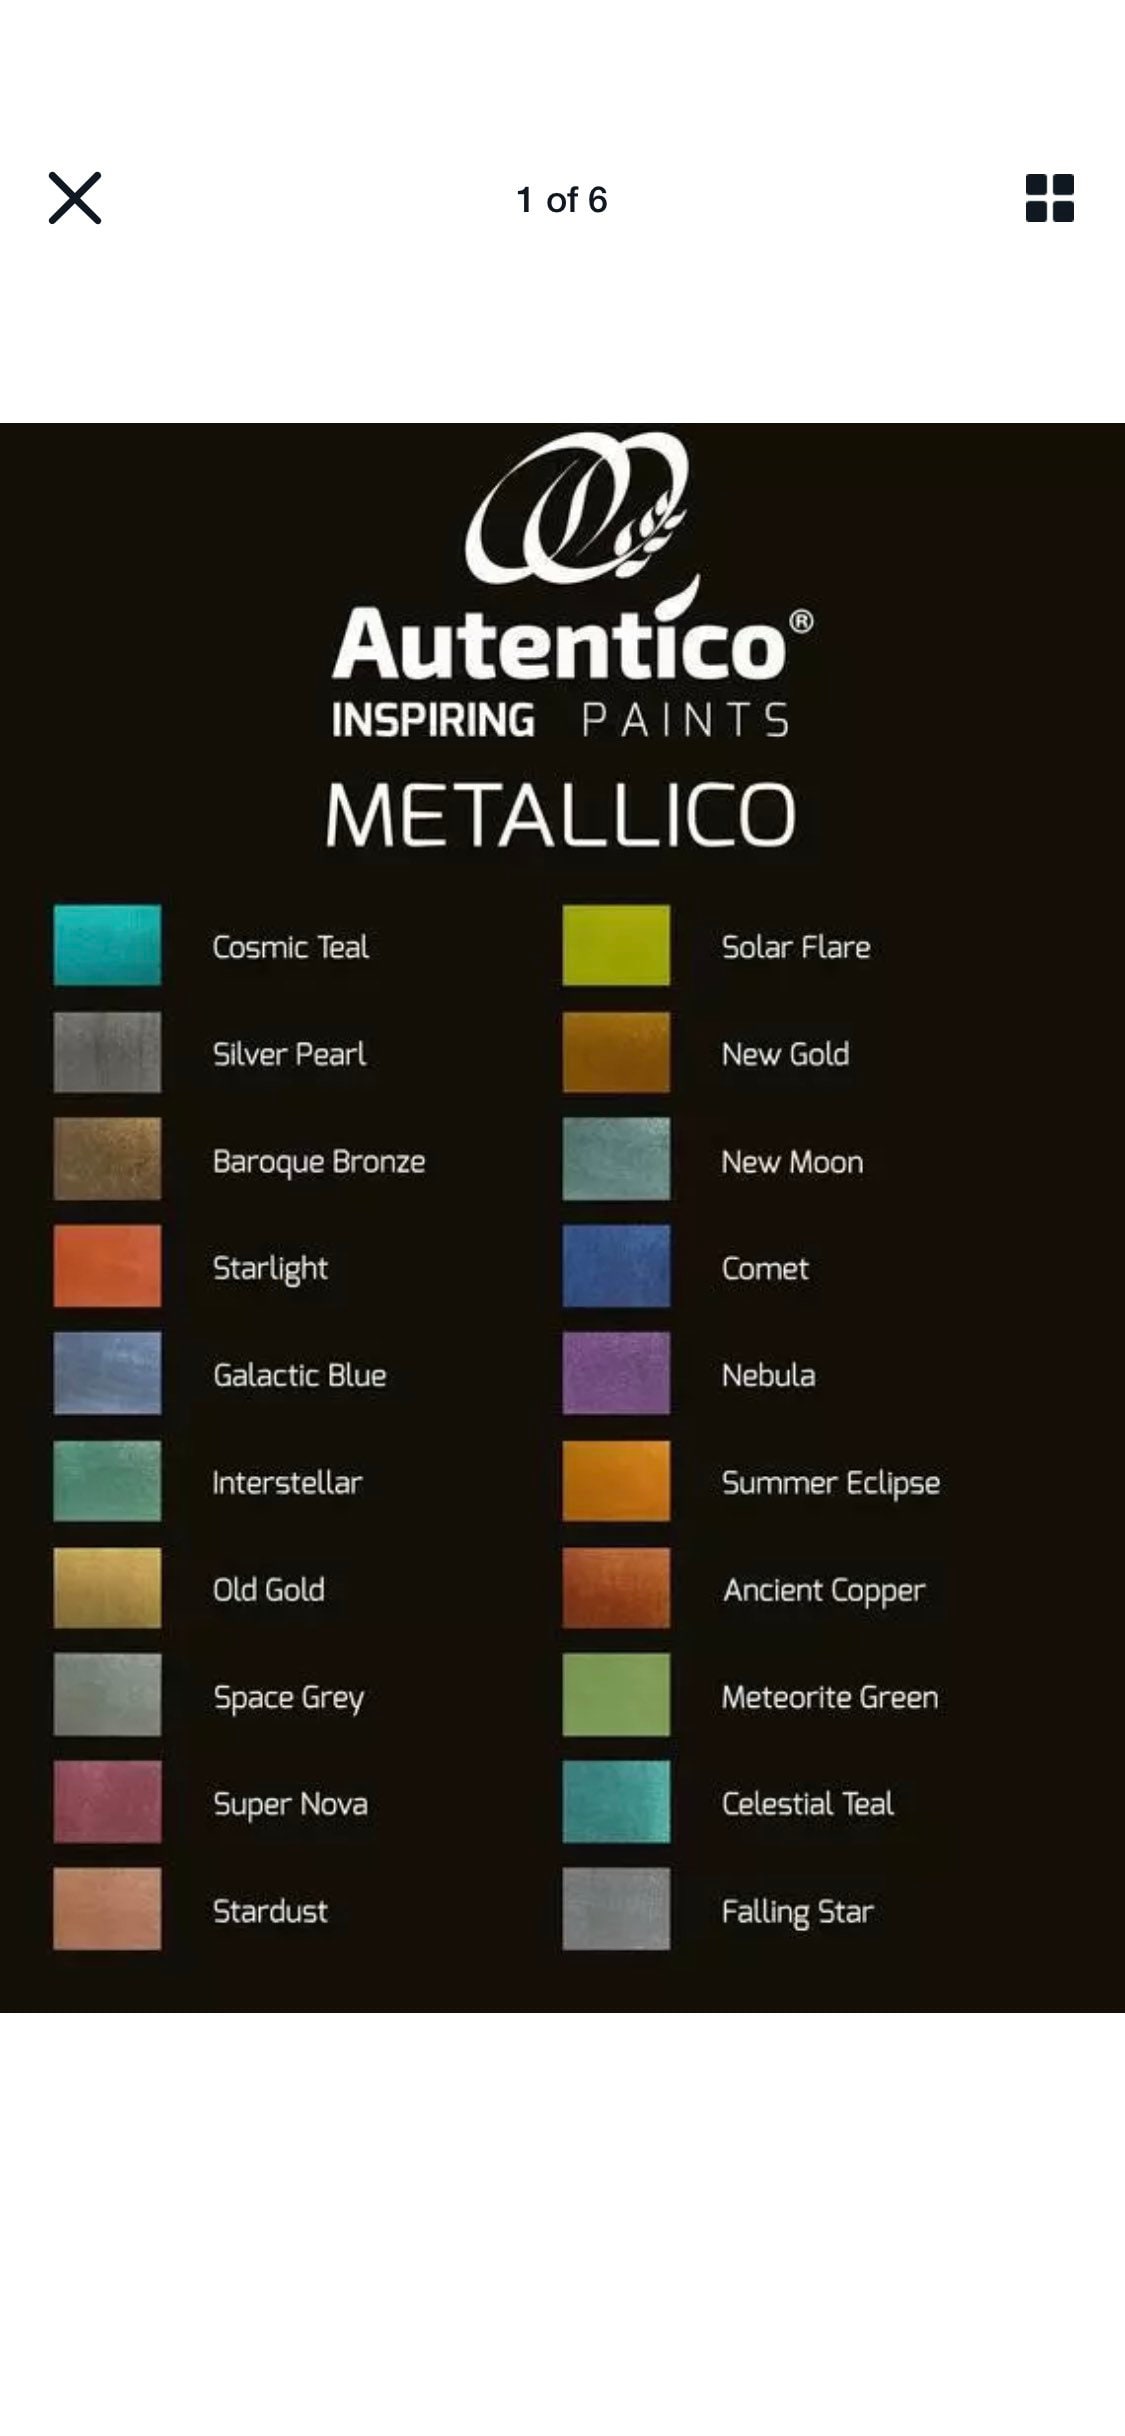 Metallic Paint, Water Based Acrylic in Gold Silver Copper Blue Green Red,  30ml 1 Oz Bottle 